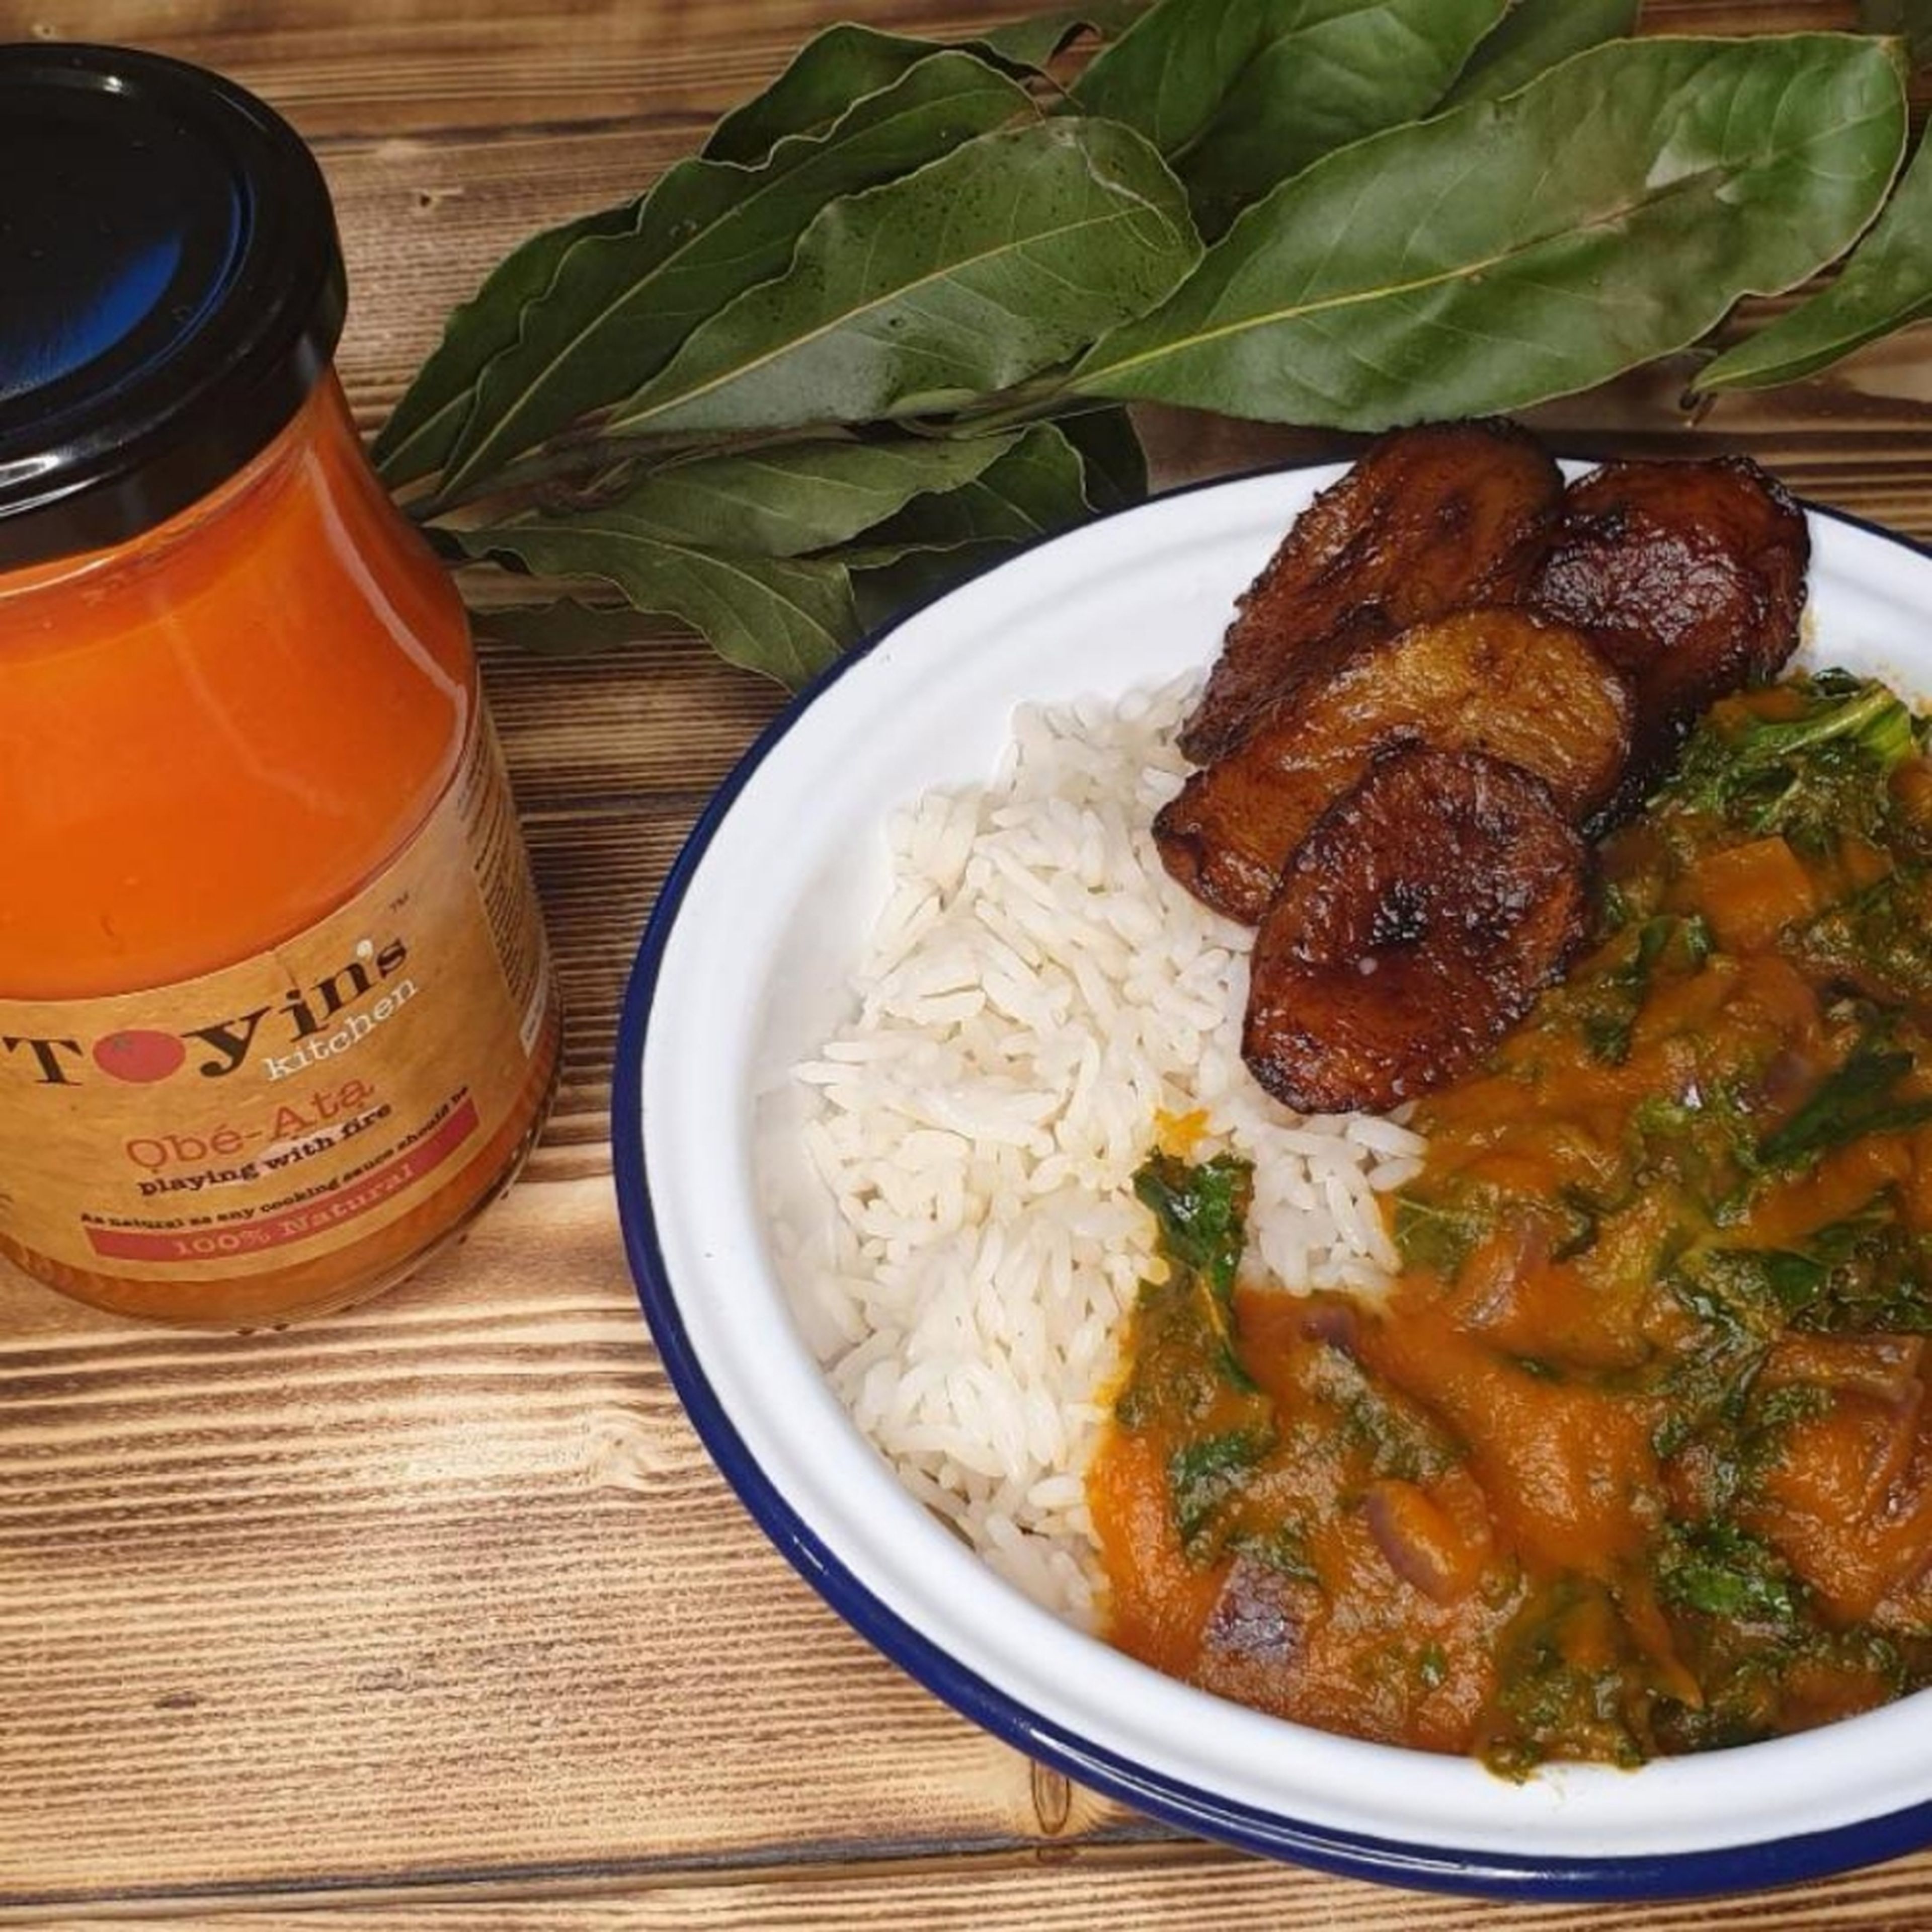 Thank you for watching this step by step guide on how to cook Nigerian Kale Stew using Obe-Ata from Toyin's kitchen. If you would like to order Obe-Ata please visit my website shop on www.toyinskitchen.co.uk.